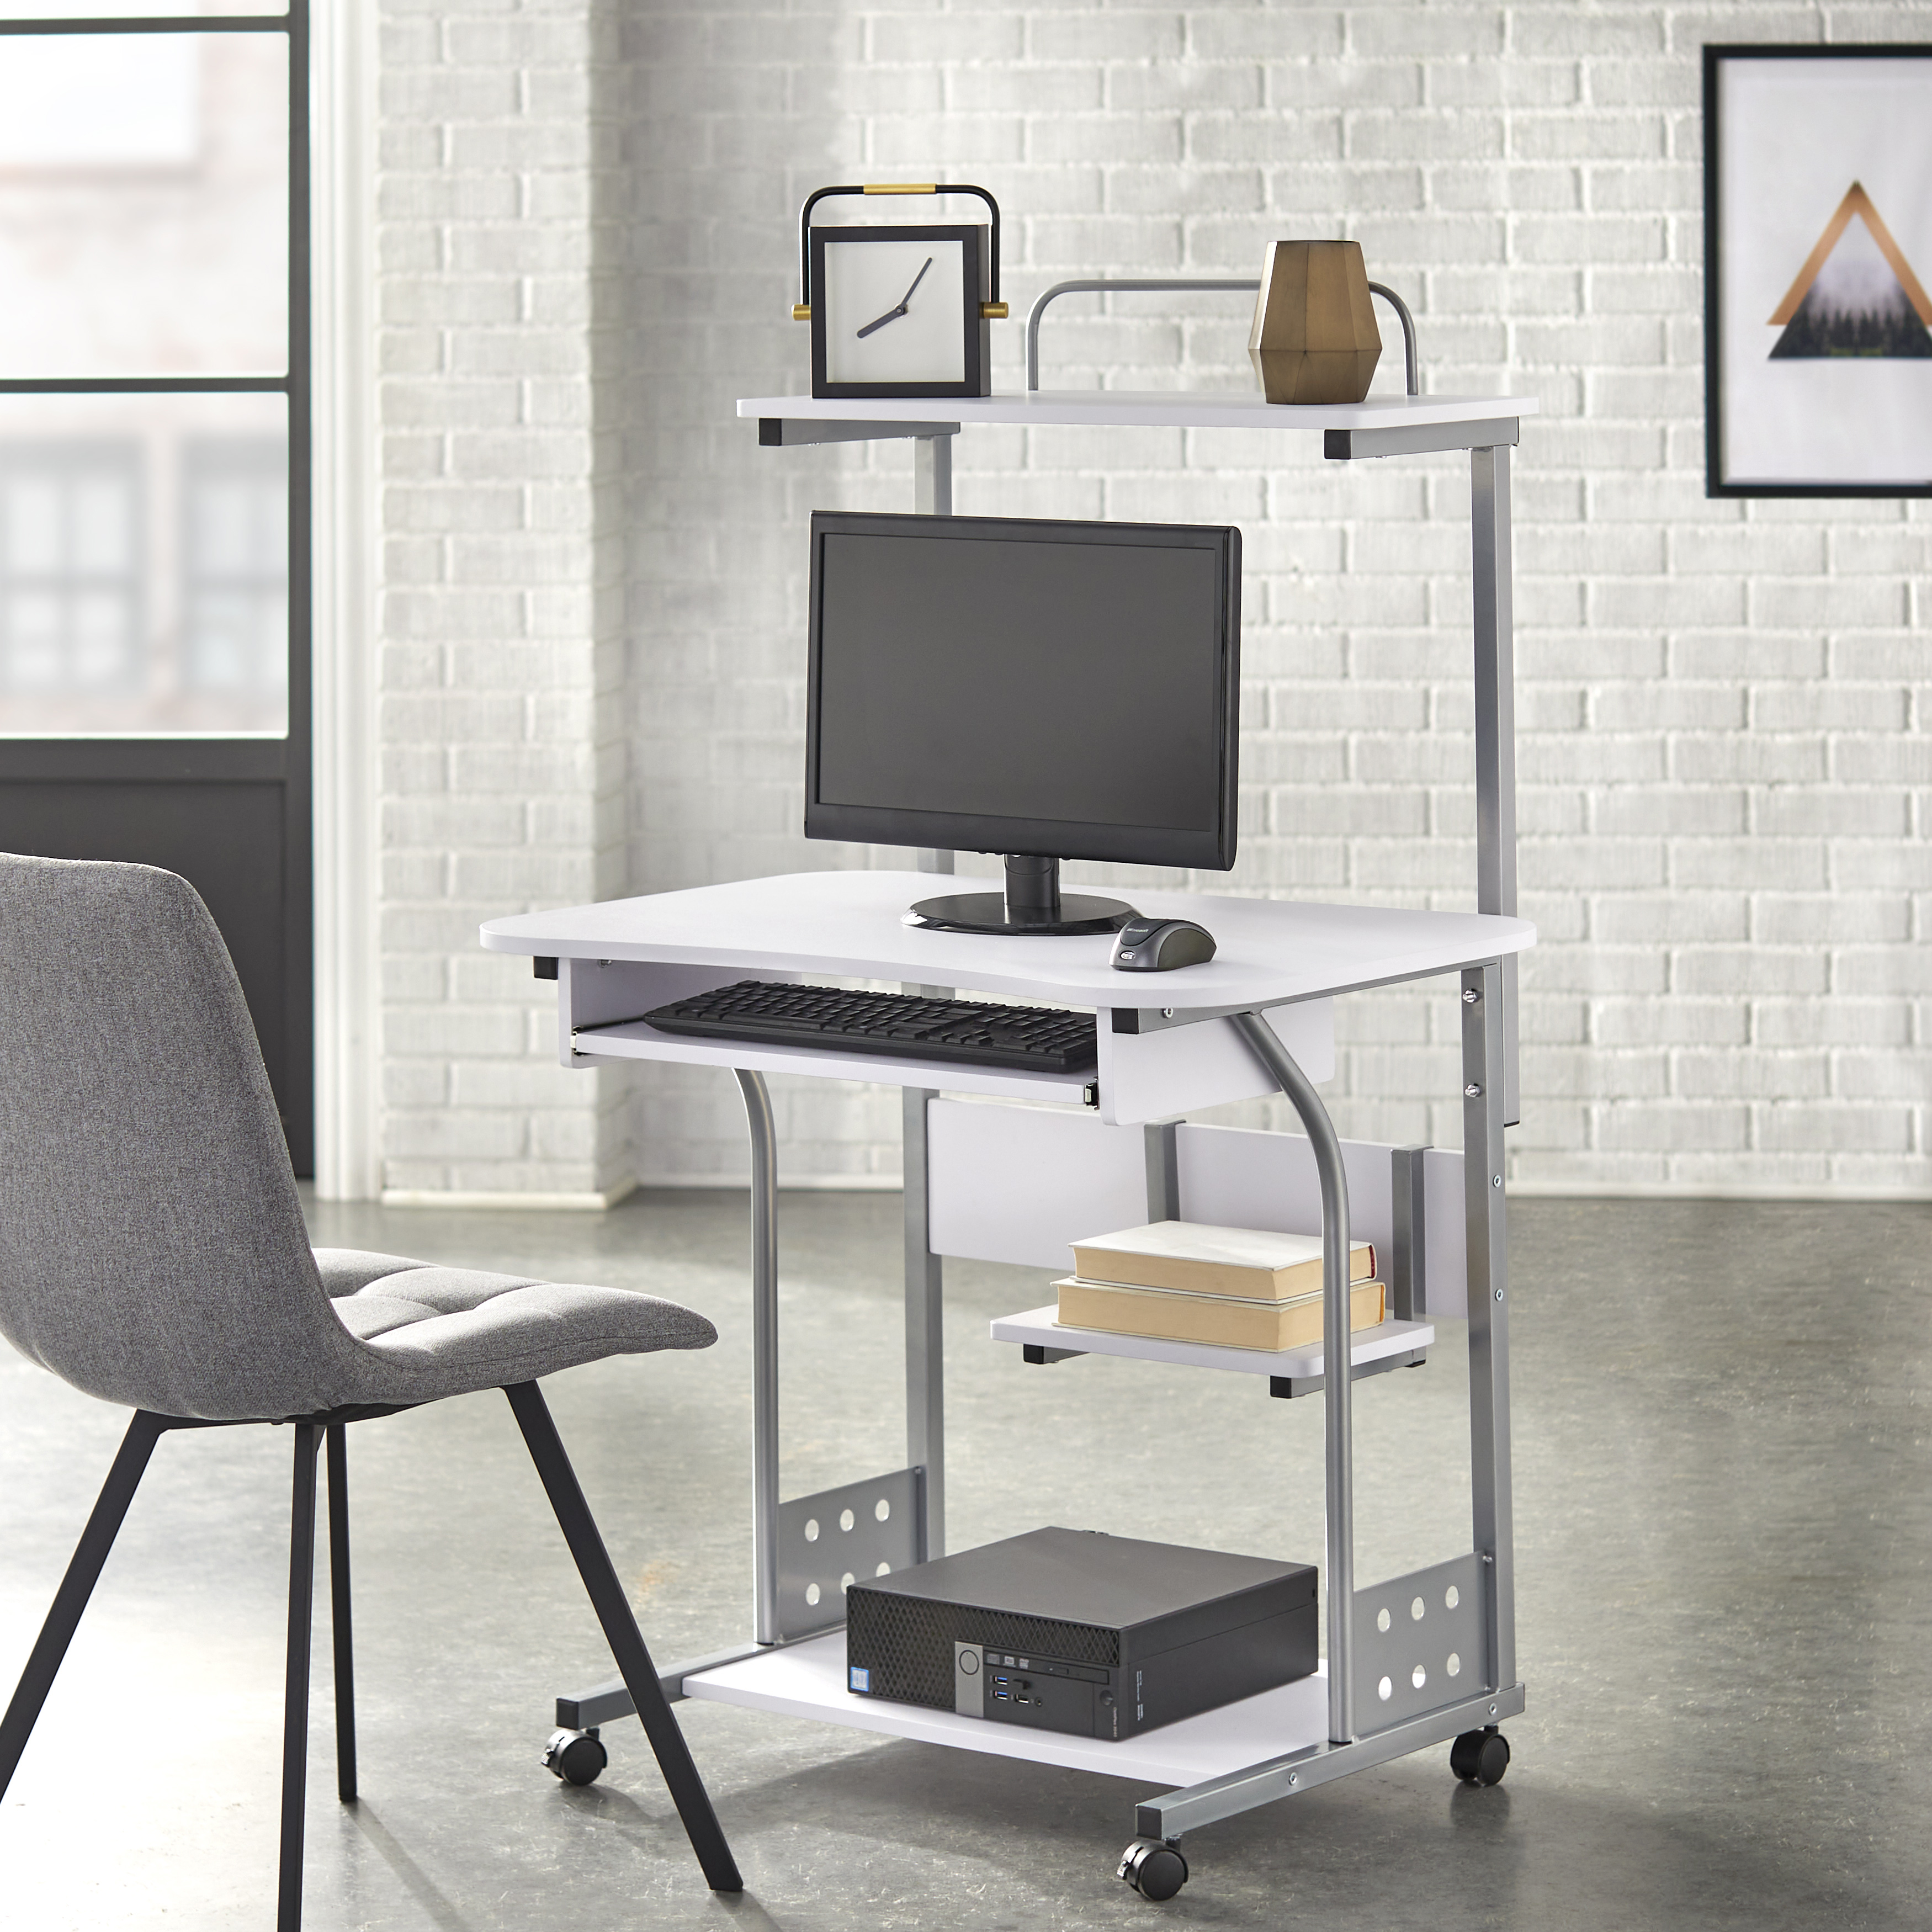 Buylateral Mobile Computer Tower Desk with Storage - image 1 of 4